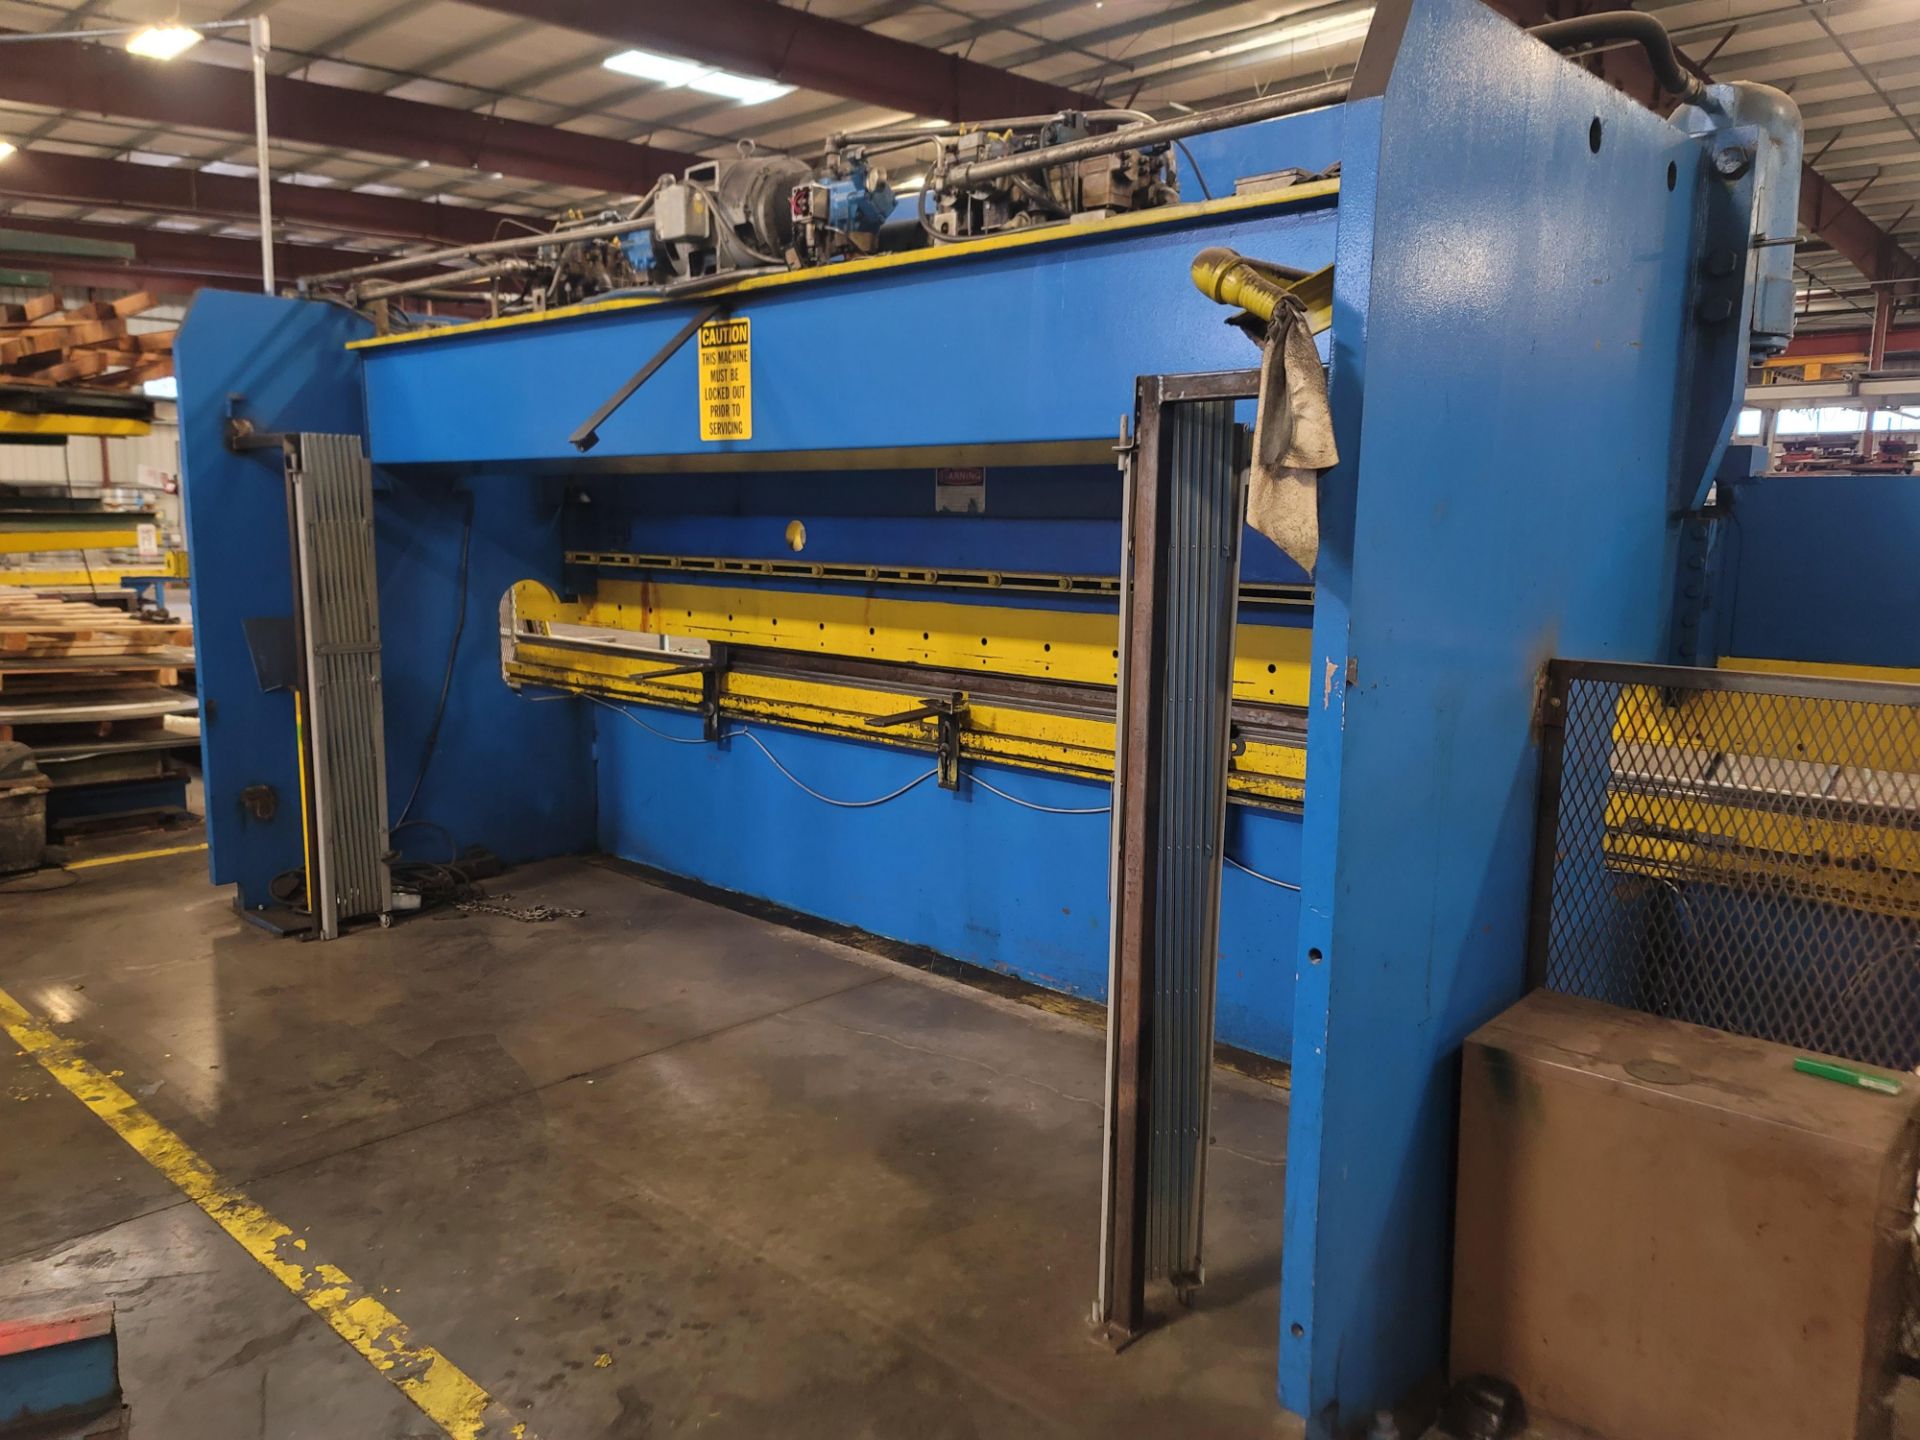 PACIFIC K175-21 PRESS BRAKE, 3/16" X 21', HYDRAULIC, PROTECH EAGLE EYE GUARDING SYSTEM, S/N 8902 - Image 8 of 12